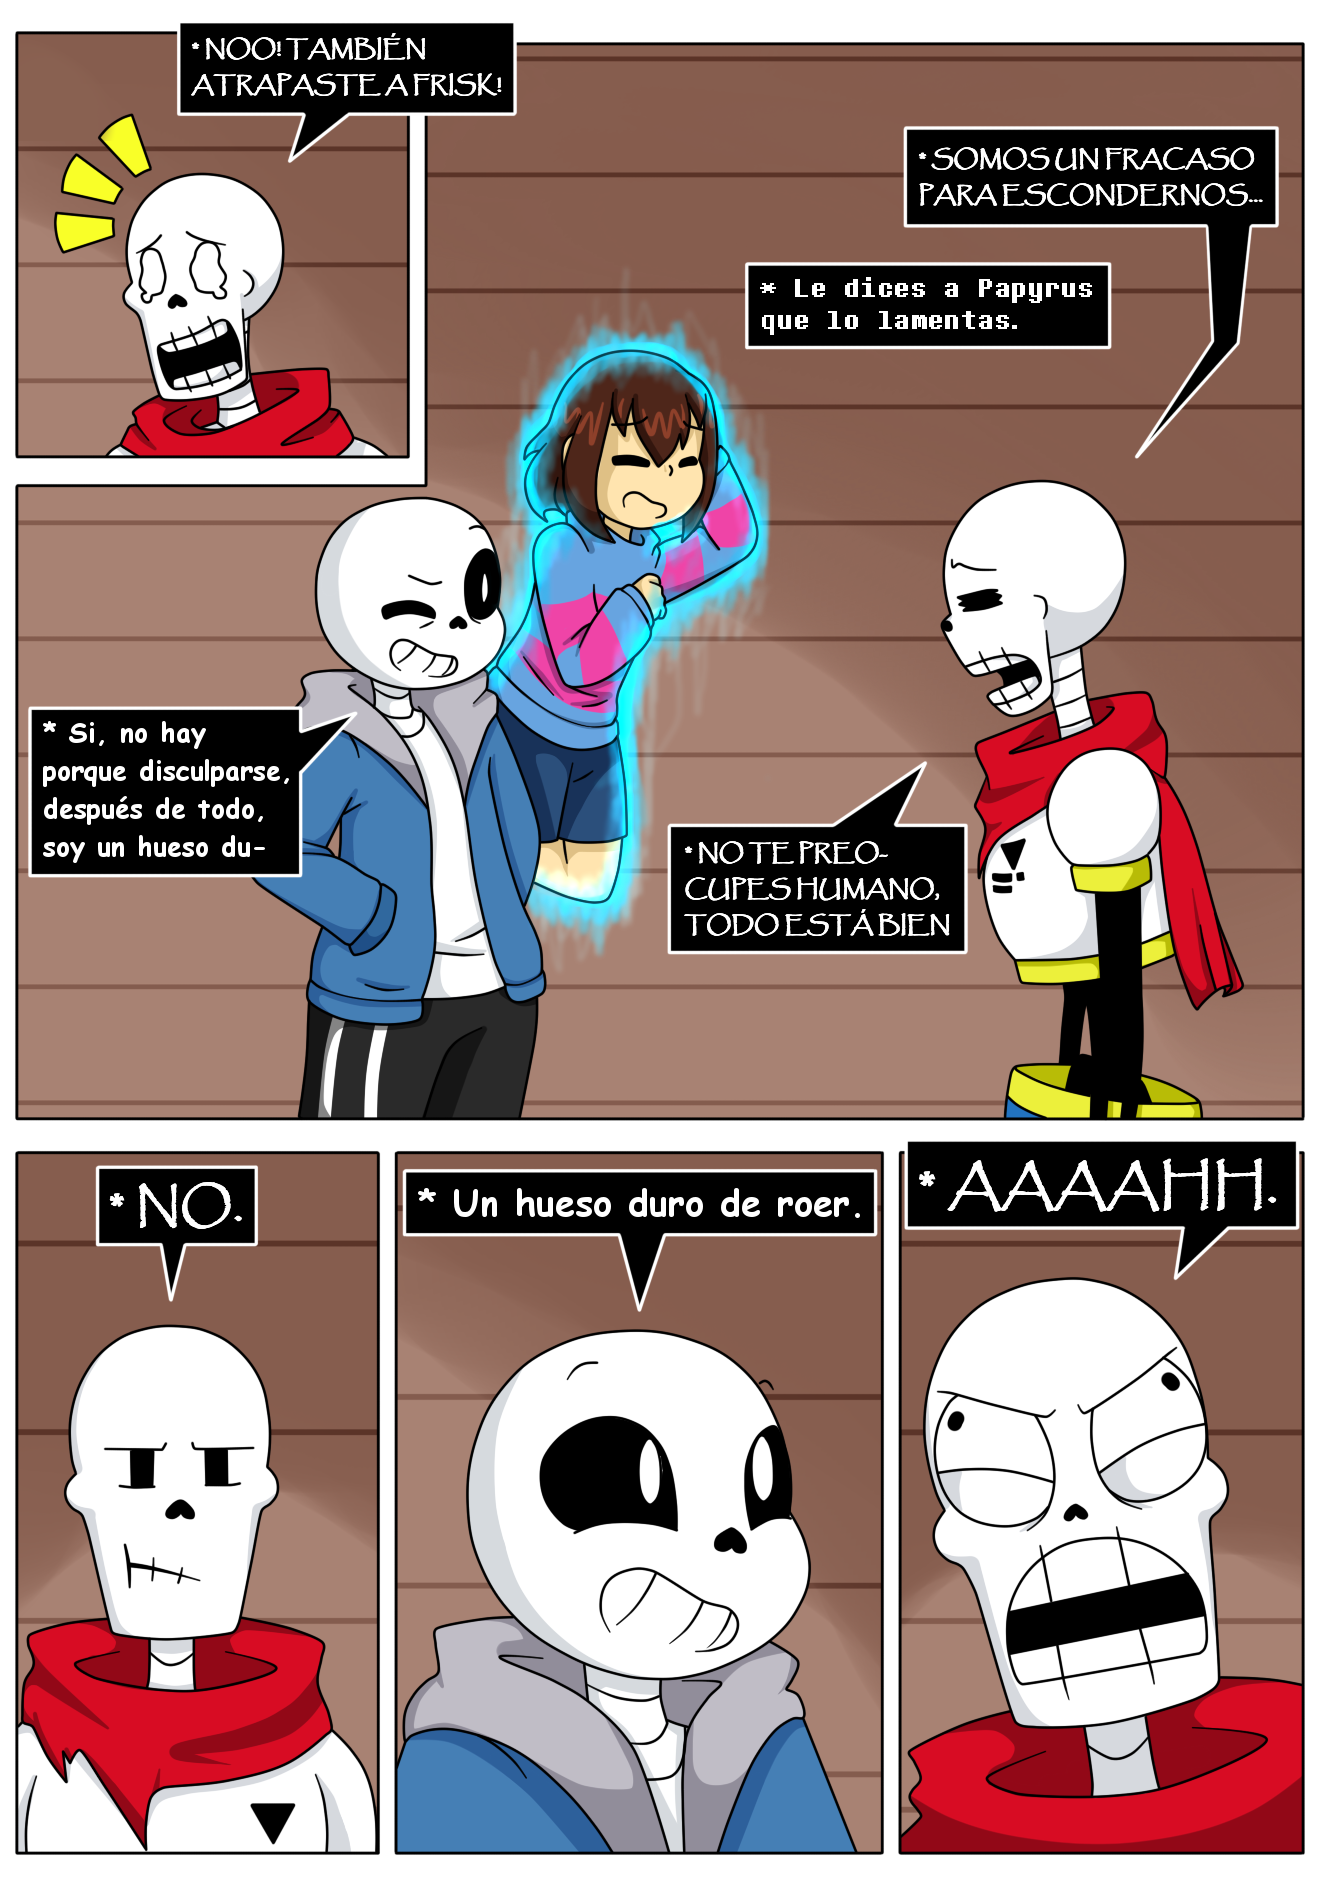 THE PLAYER COMIC. SEASON.2 // Page #71 [ENG] by TheCherryBlue on DeviantArt